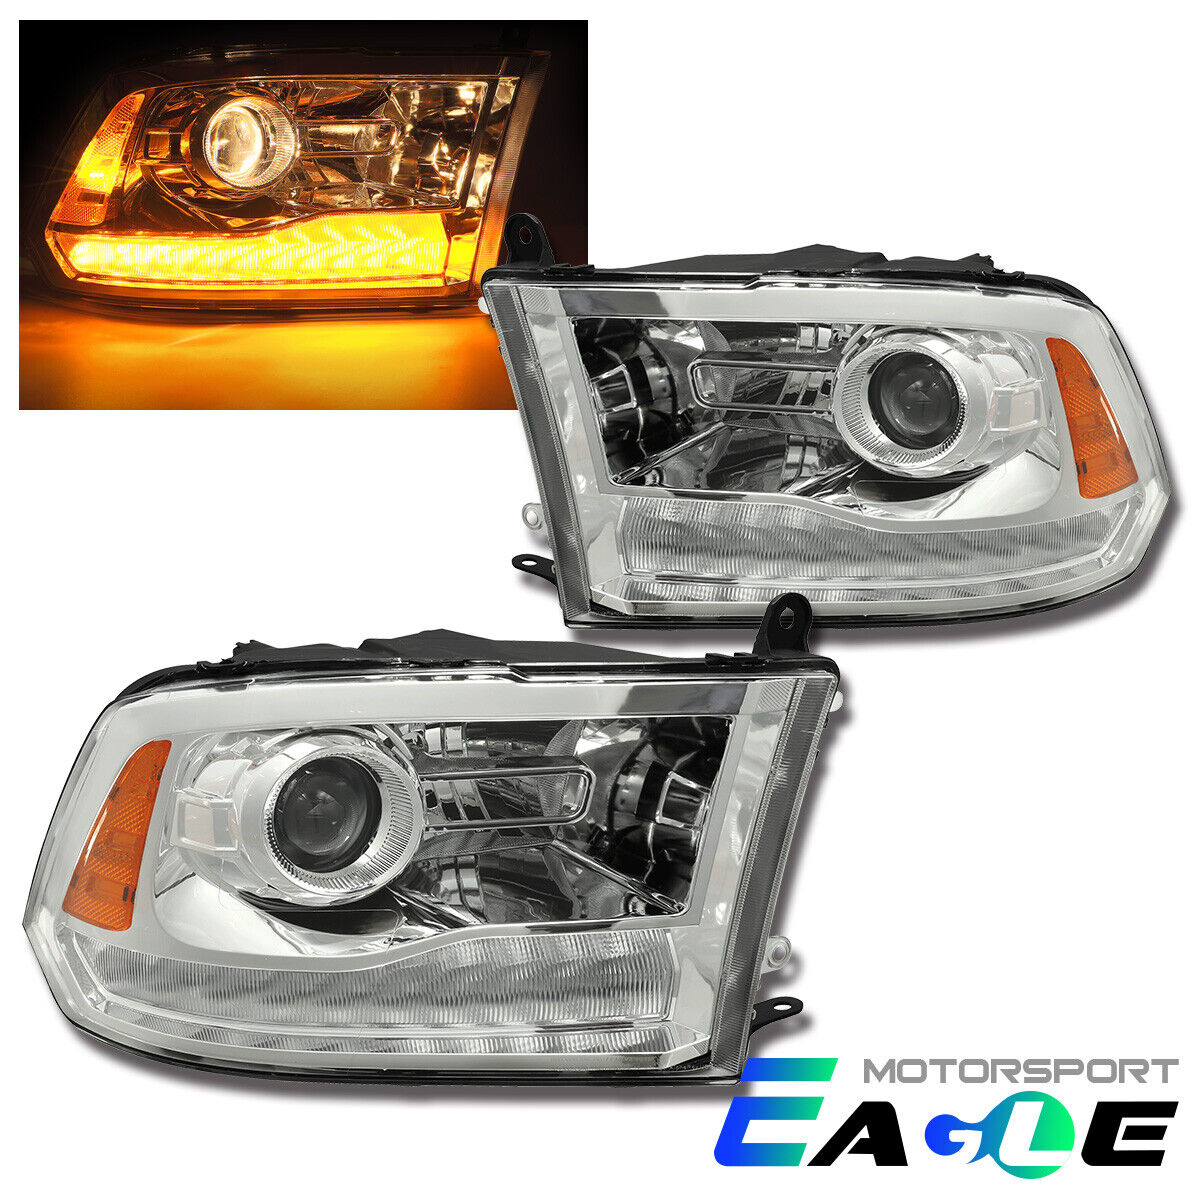 Fit 2009-2018 Dodge Ram 1500/2500/3500 LED DRL Projector Headlights Pair